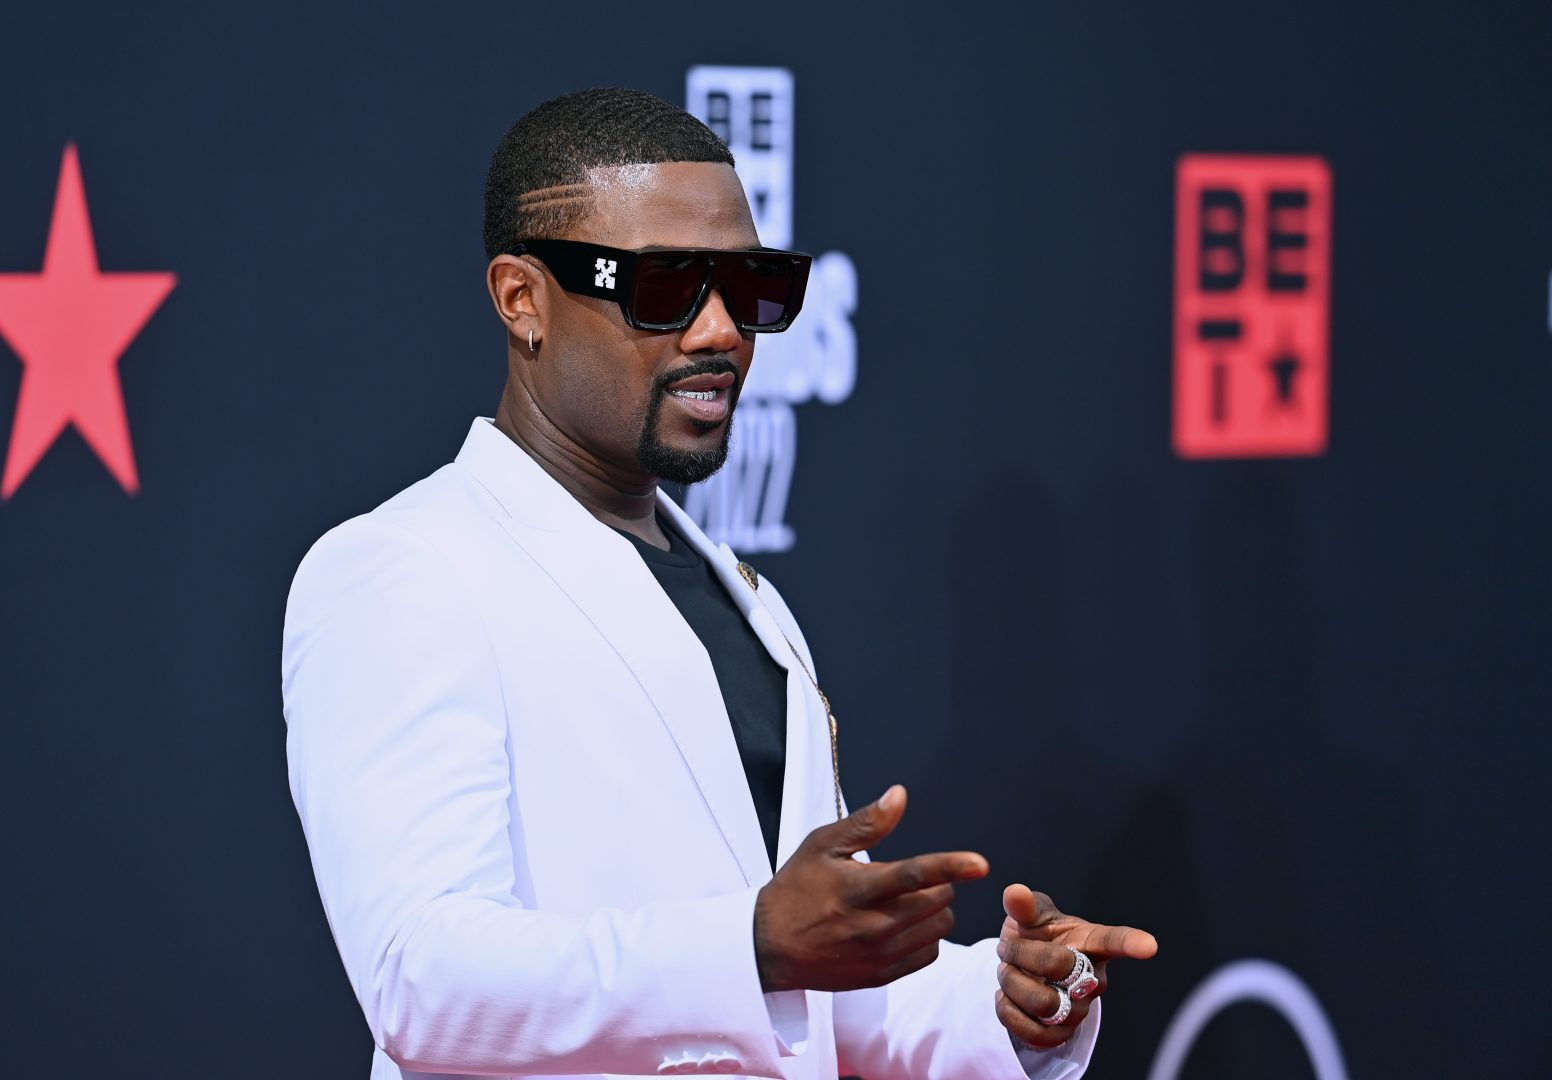 View highlights from the 2022 BET Hip Hop Awards red carpet